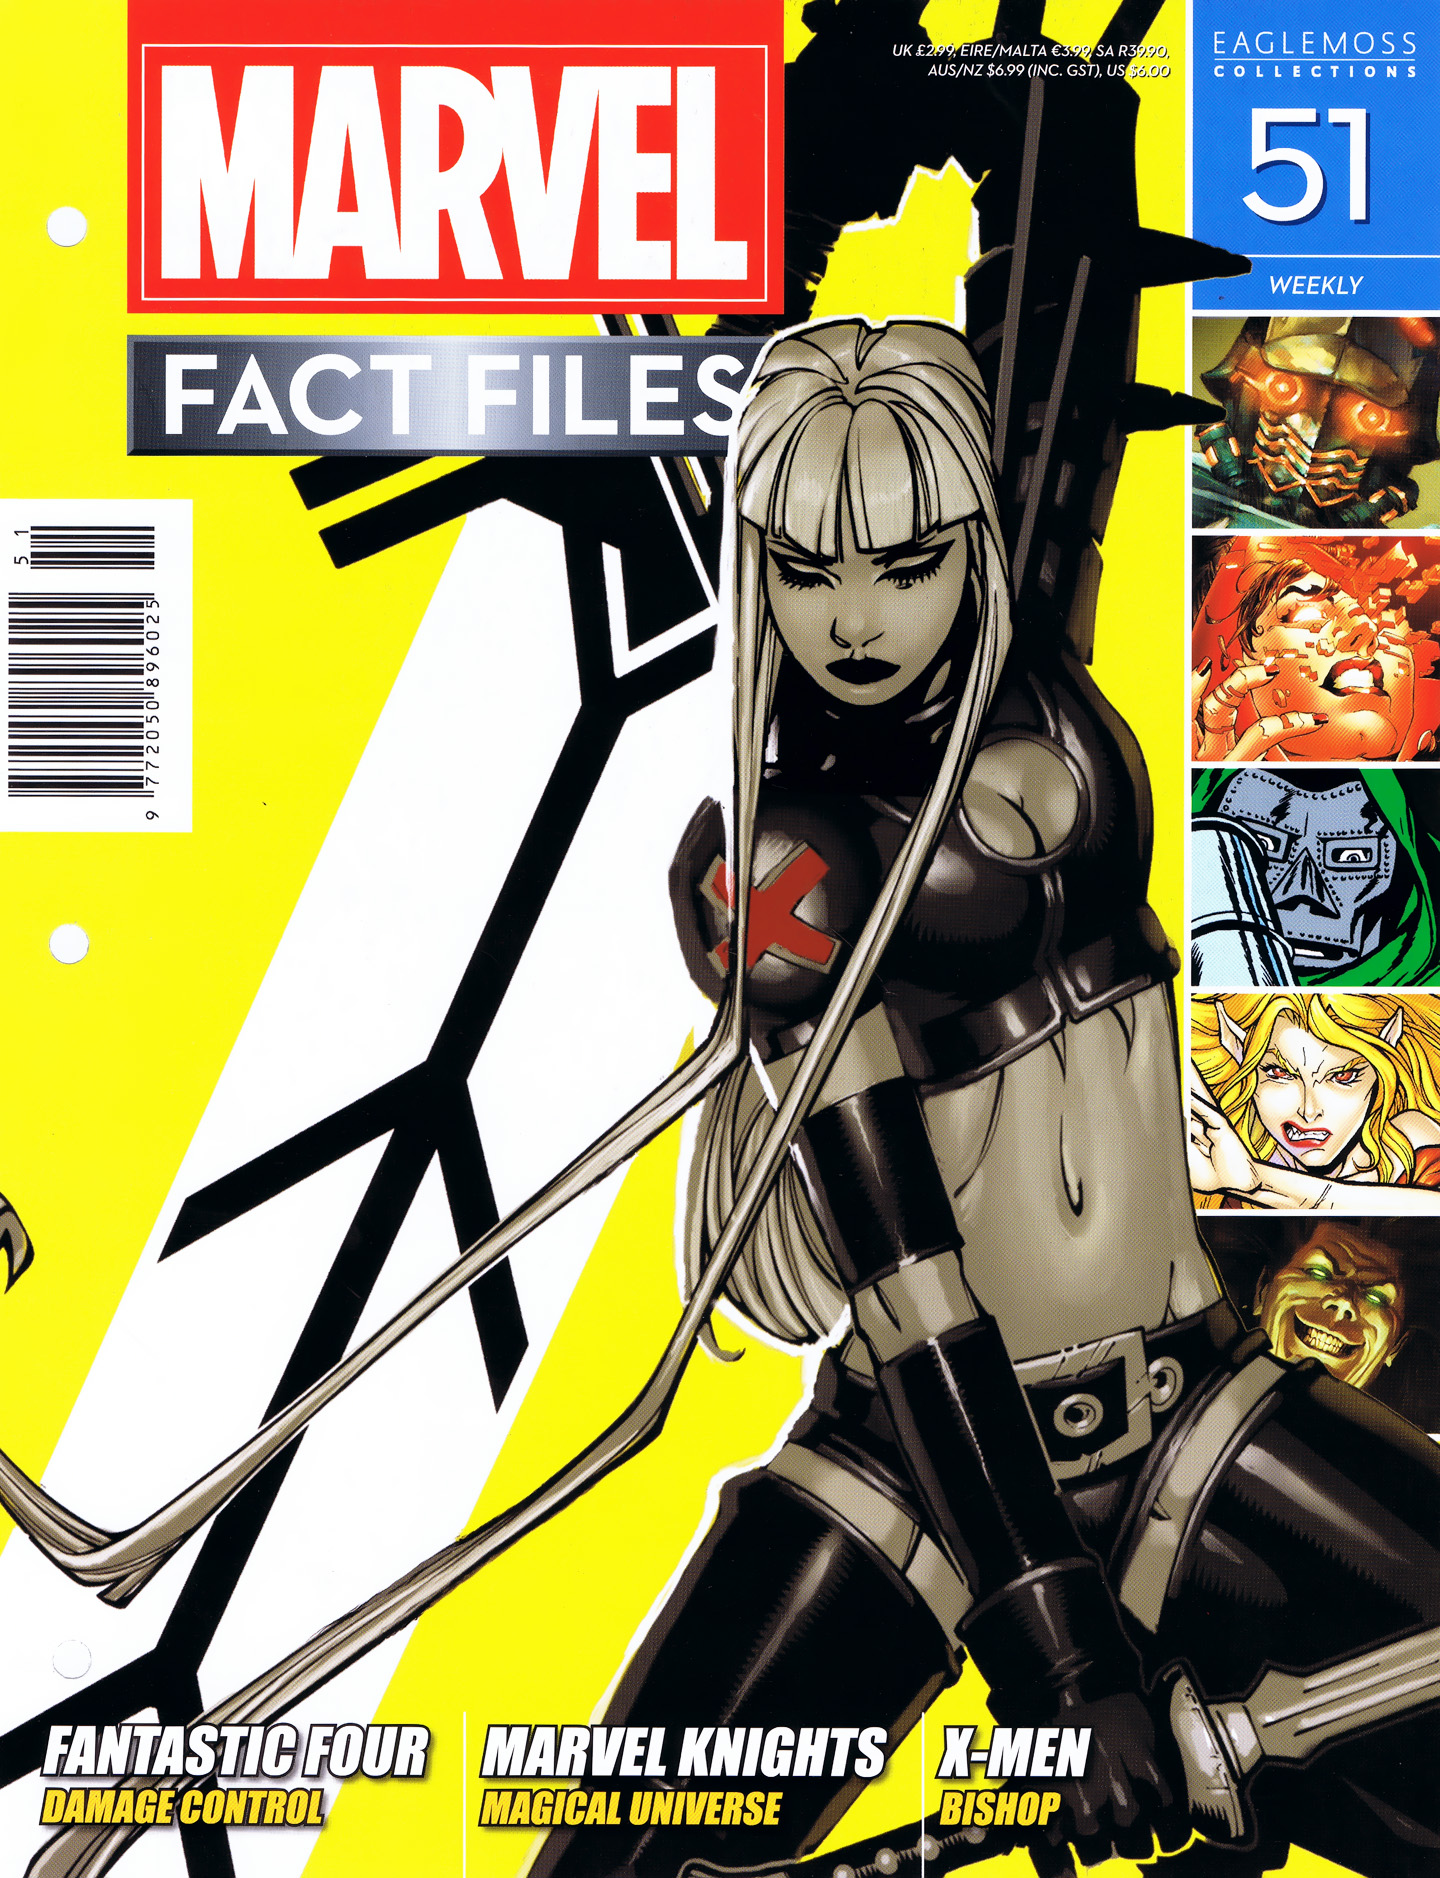 Read online Marvel Fact Files comic -  Issue #51 - 1